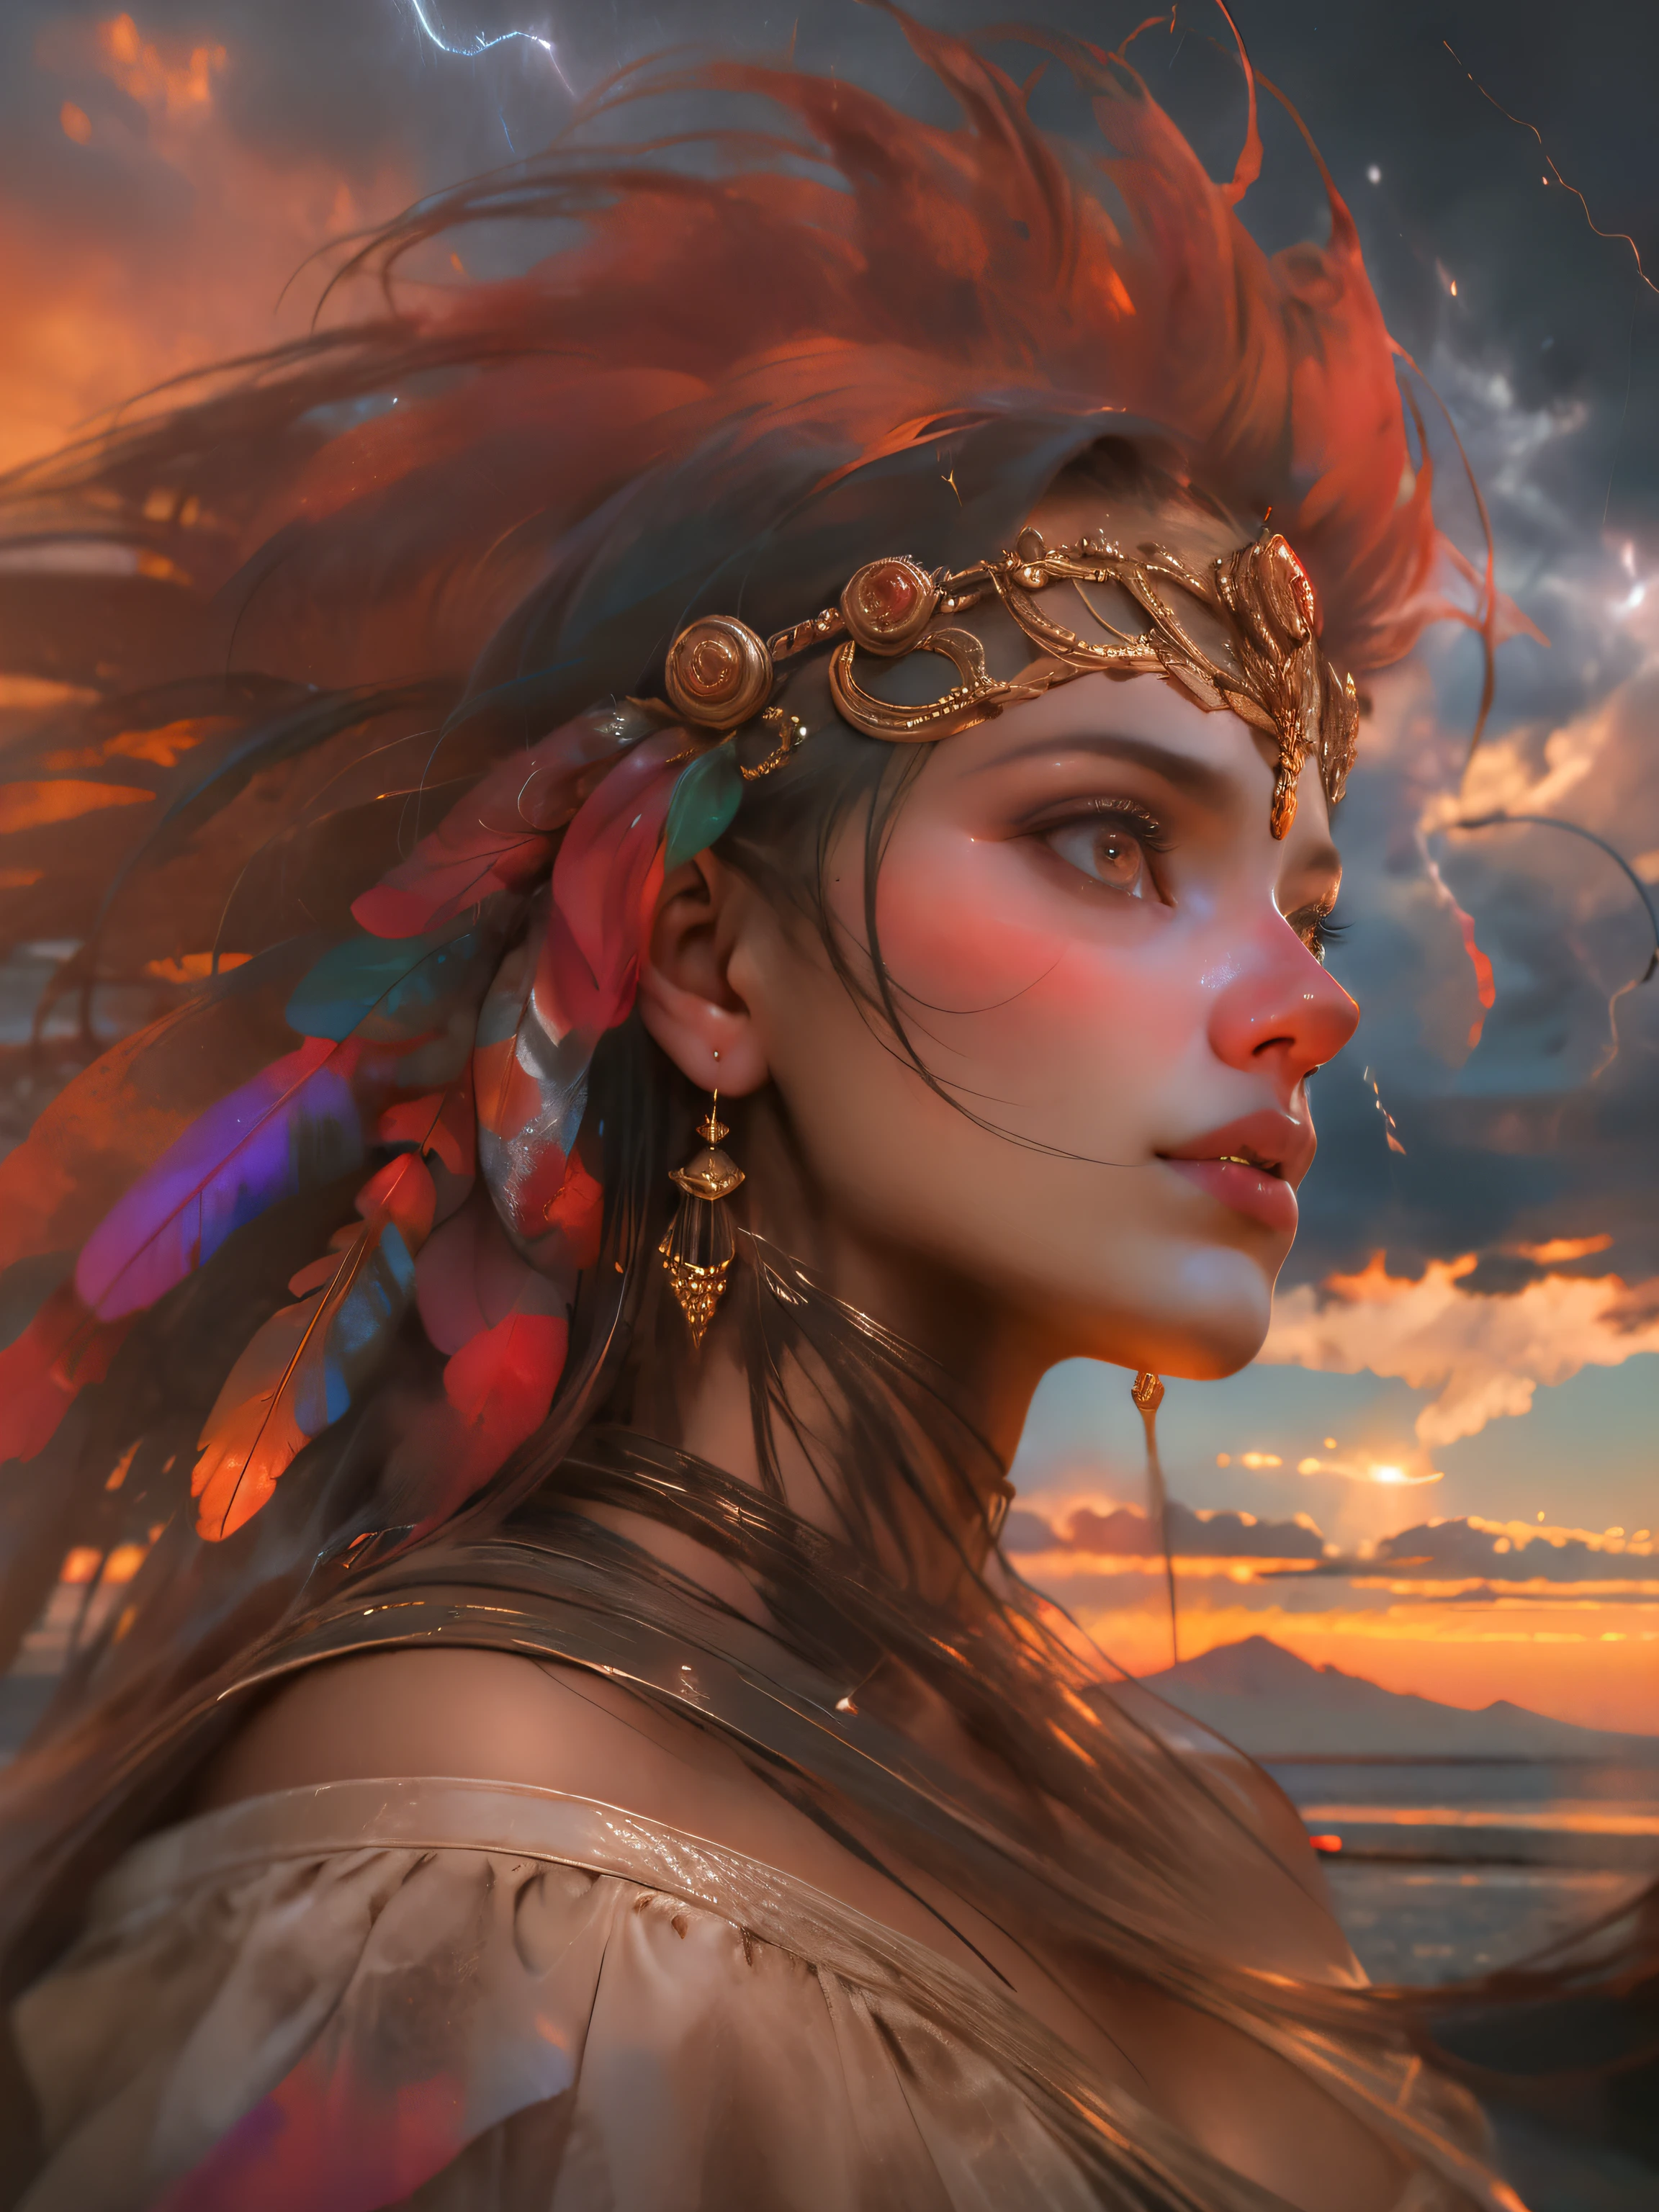 BEAUTIFUL WOMAN in the mountain, sunset sky, red sunset clouds, sunset, long hair in the wind, Eagle feathers, eagle queen, goddess dressed in Eagle feathers, fancy, overexposure, perfects eyes, metallic colors, SurrealArt , whole body, bare feet, mountain horizon view, lake in the distance, lady in the center of the scene, huge full moon in front of the sun, ((clothing transparent)), ((dark storm clouds with lightning)), lightning strikes, garoa leve, fog in the distance, goddess on top of the mountain,